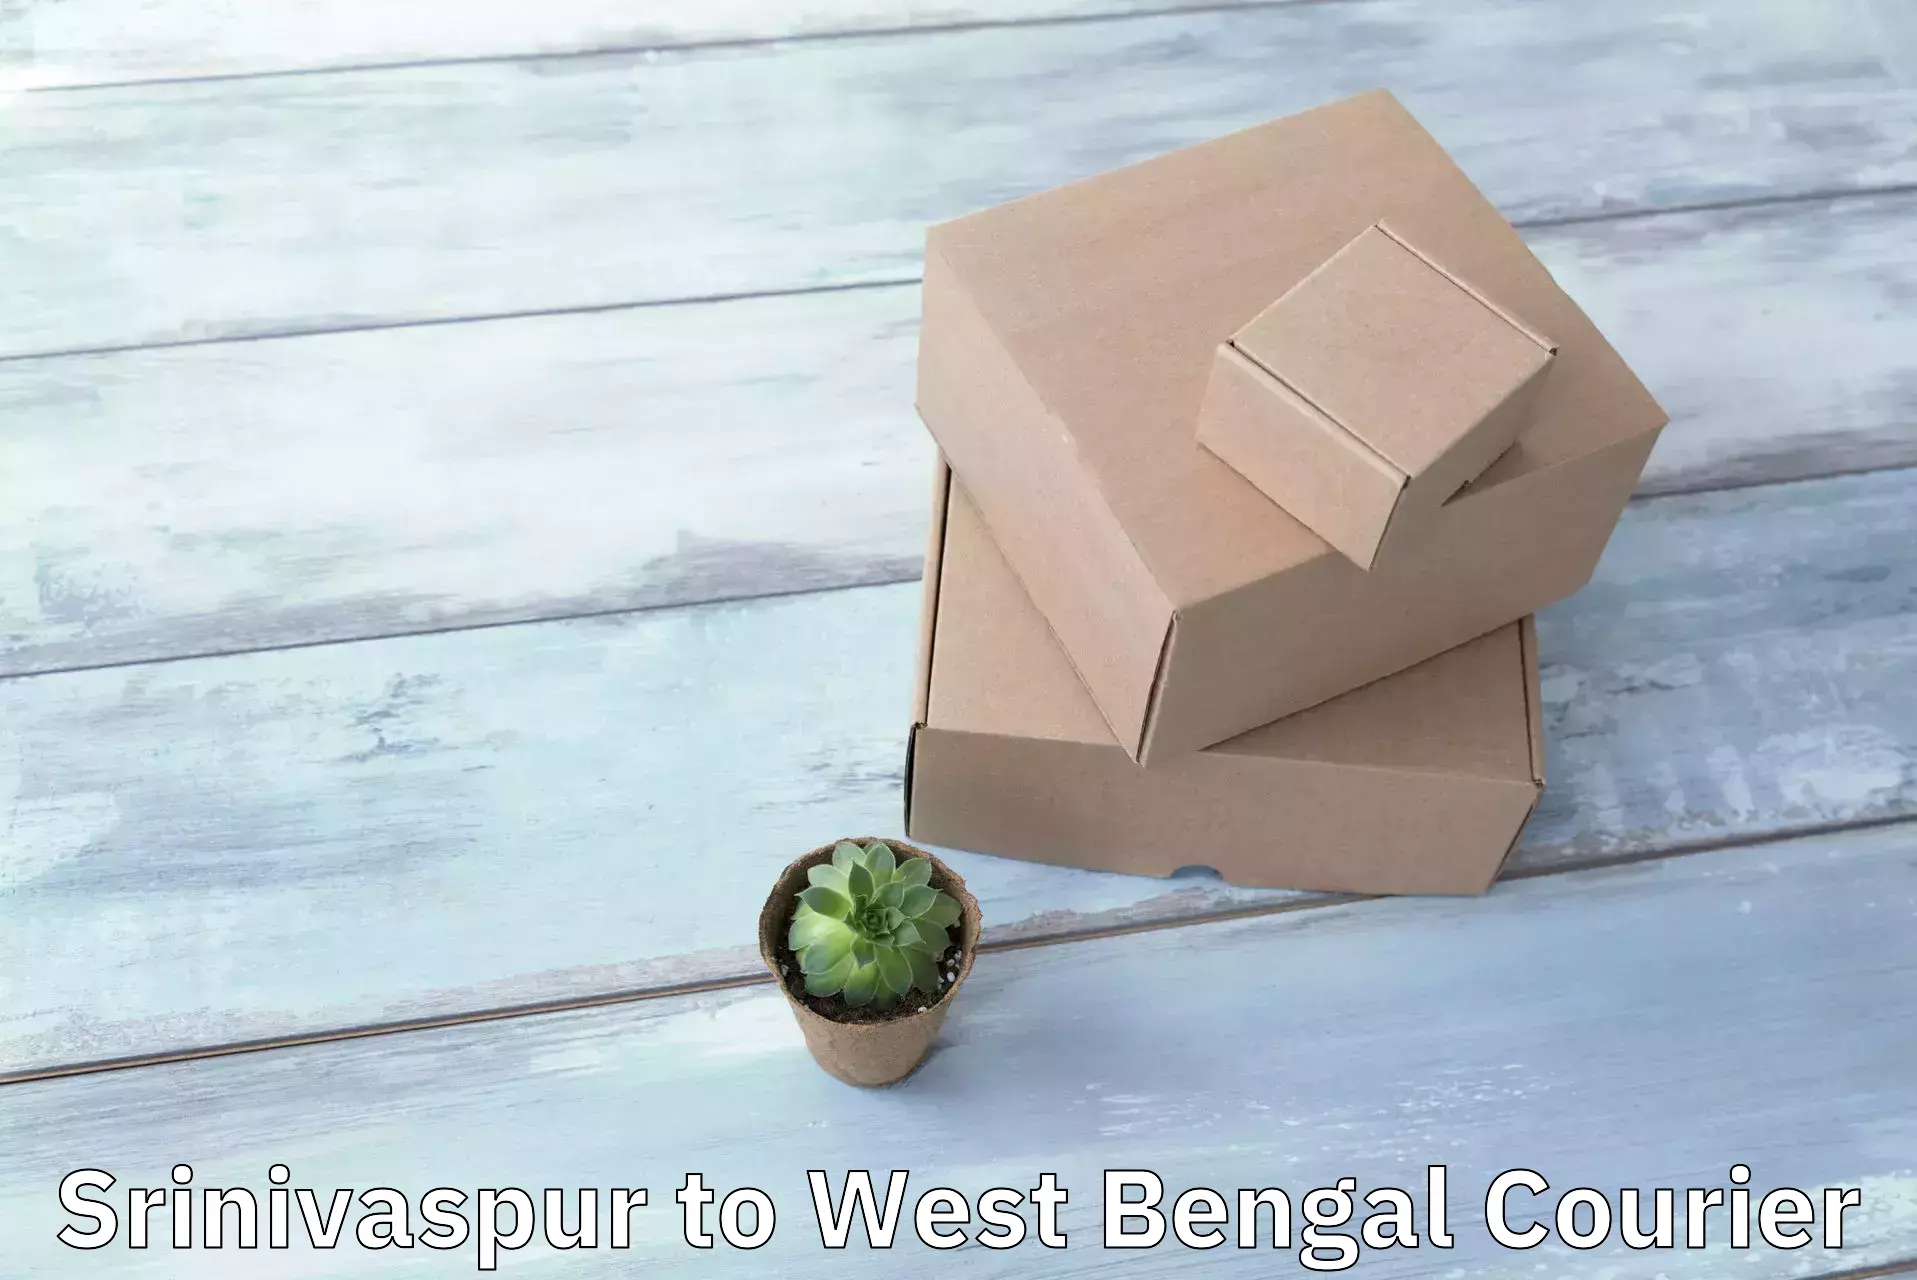 Courier service partnerships in Srinivaspur to West Bengal